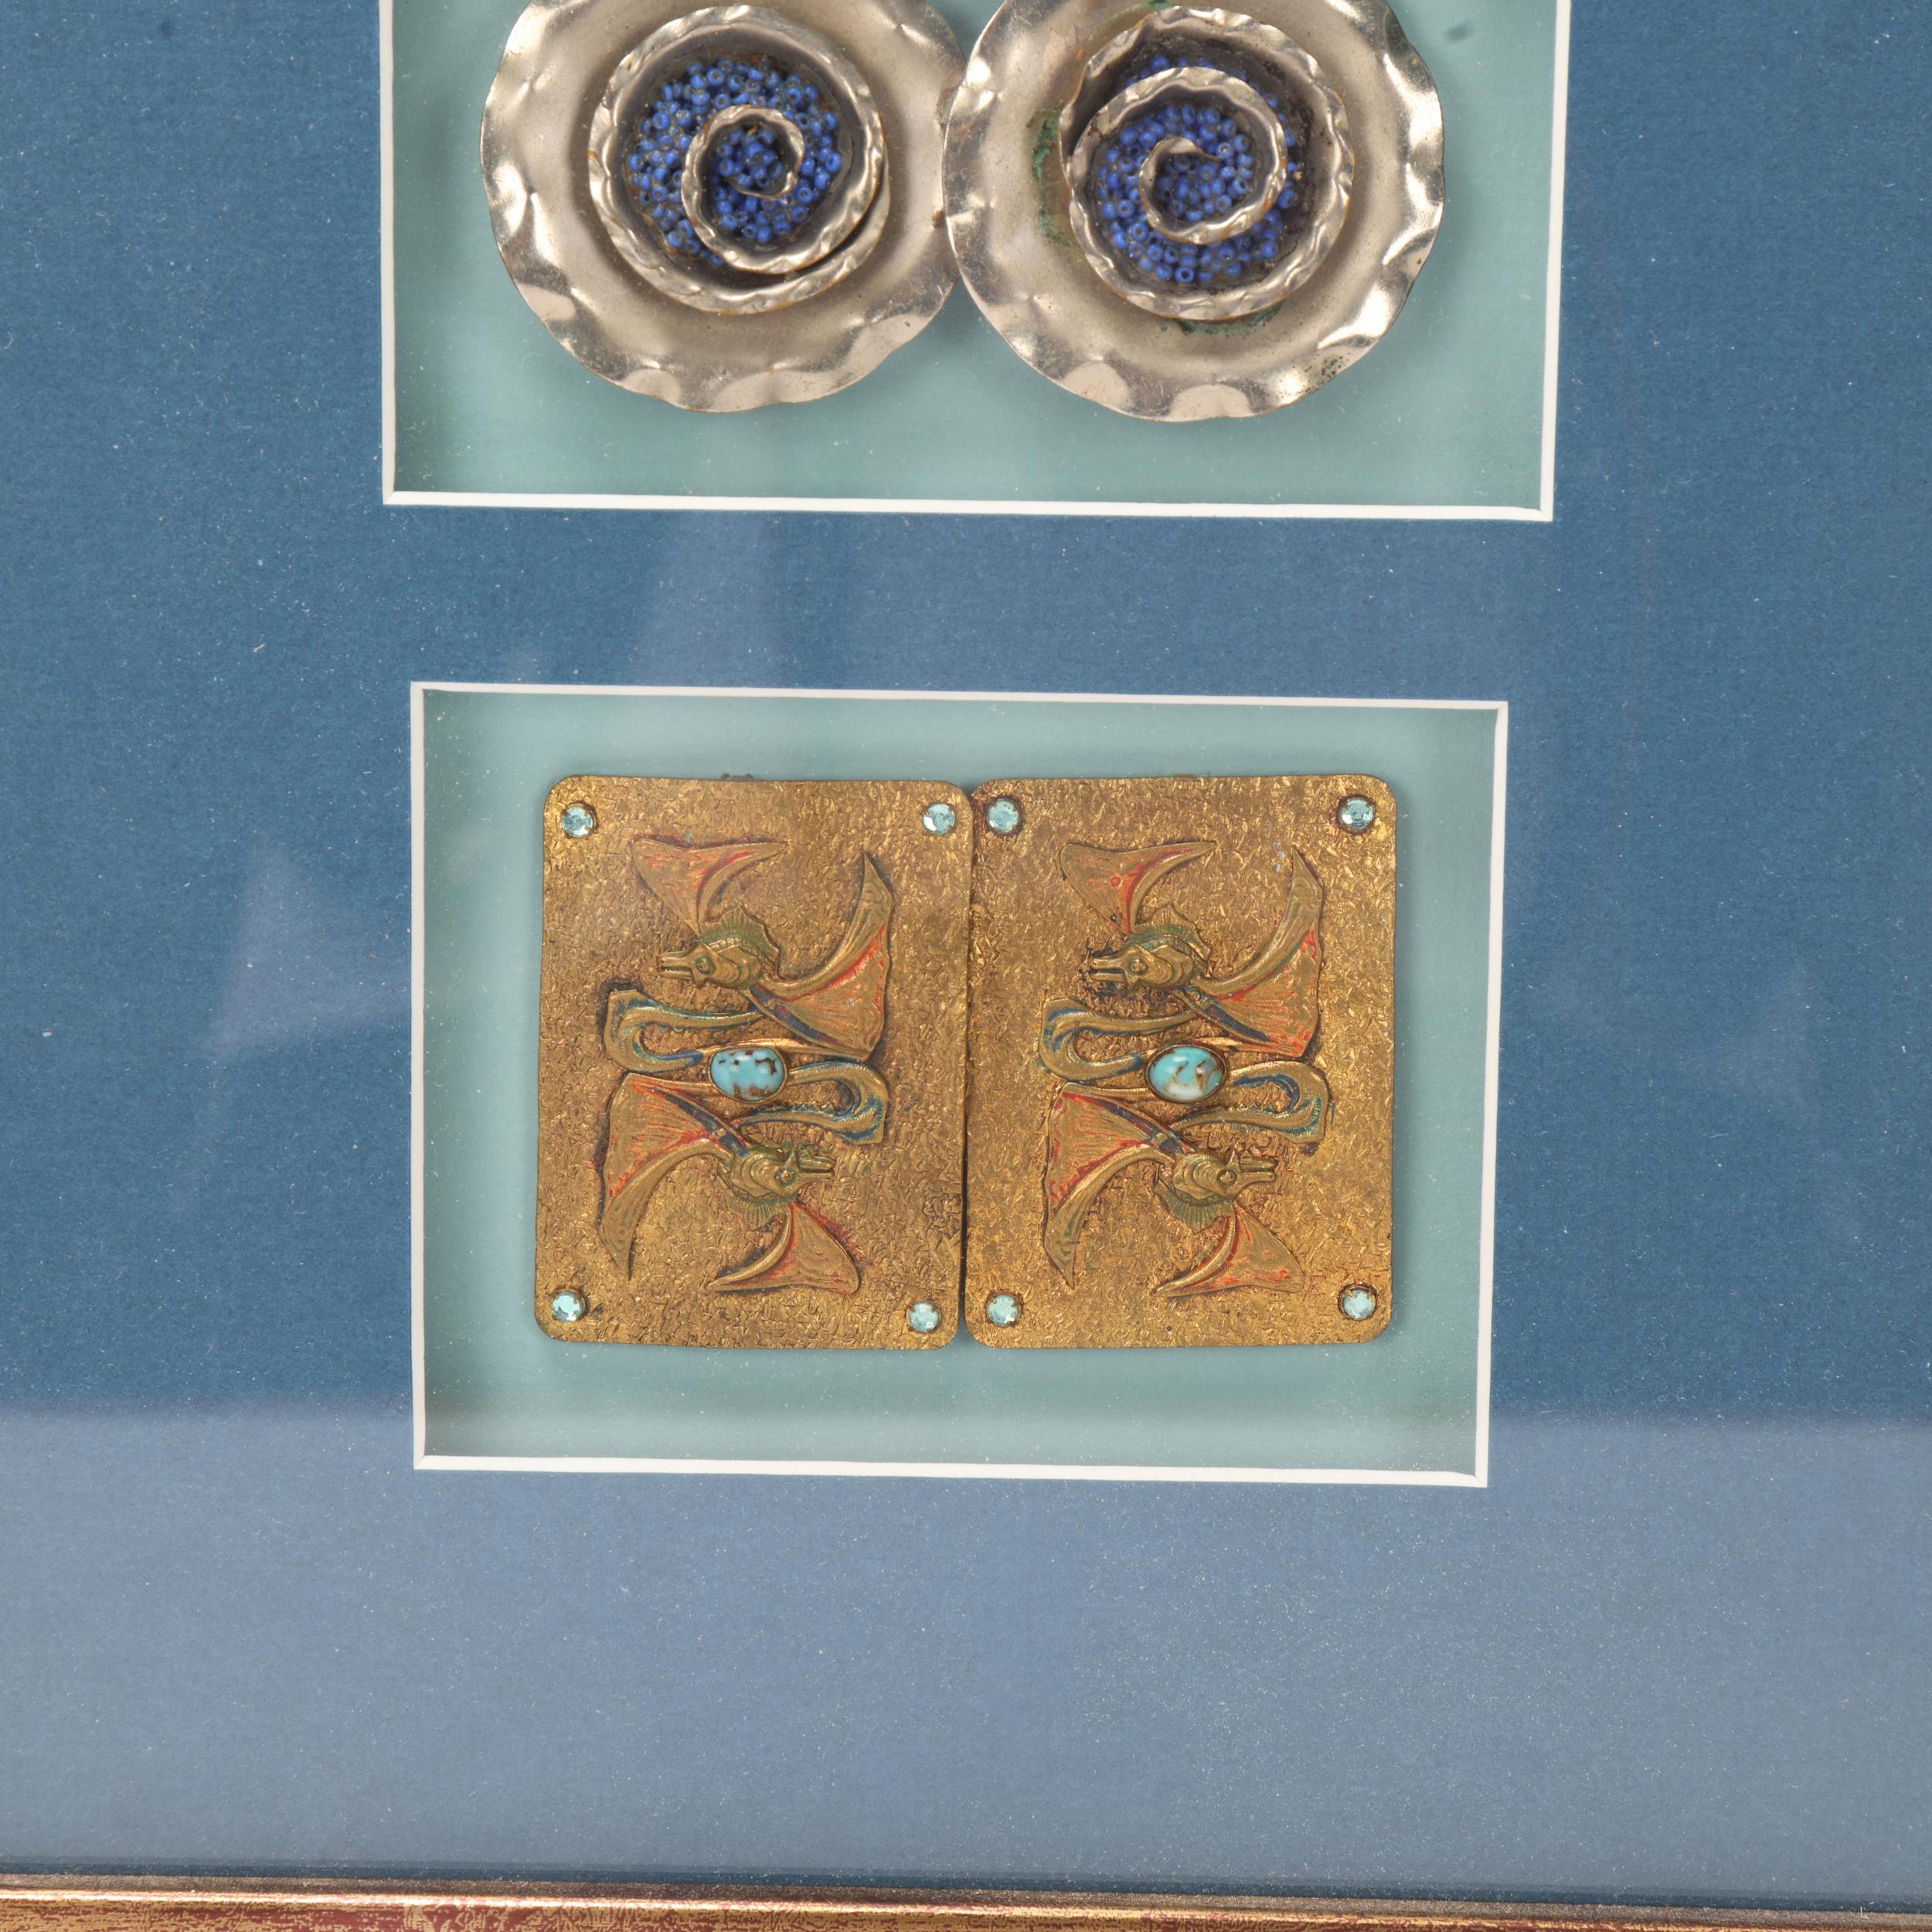 3 Art Nouveau buckles, mounted in good quality modern frame, overall frame dimensions 39.5cm x - Image 3 of 3